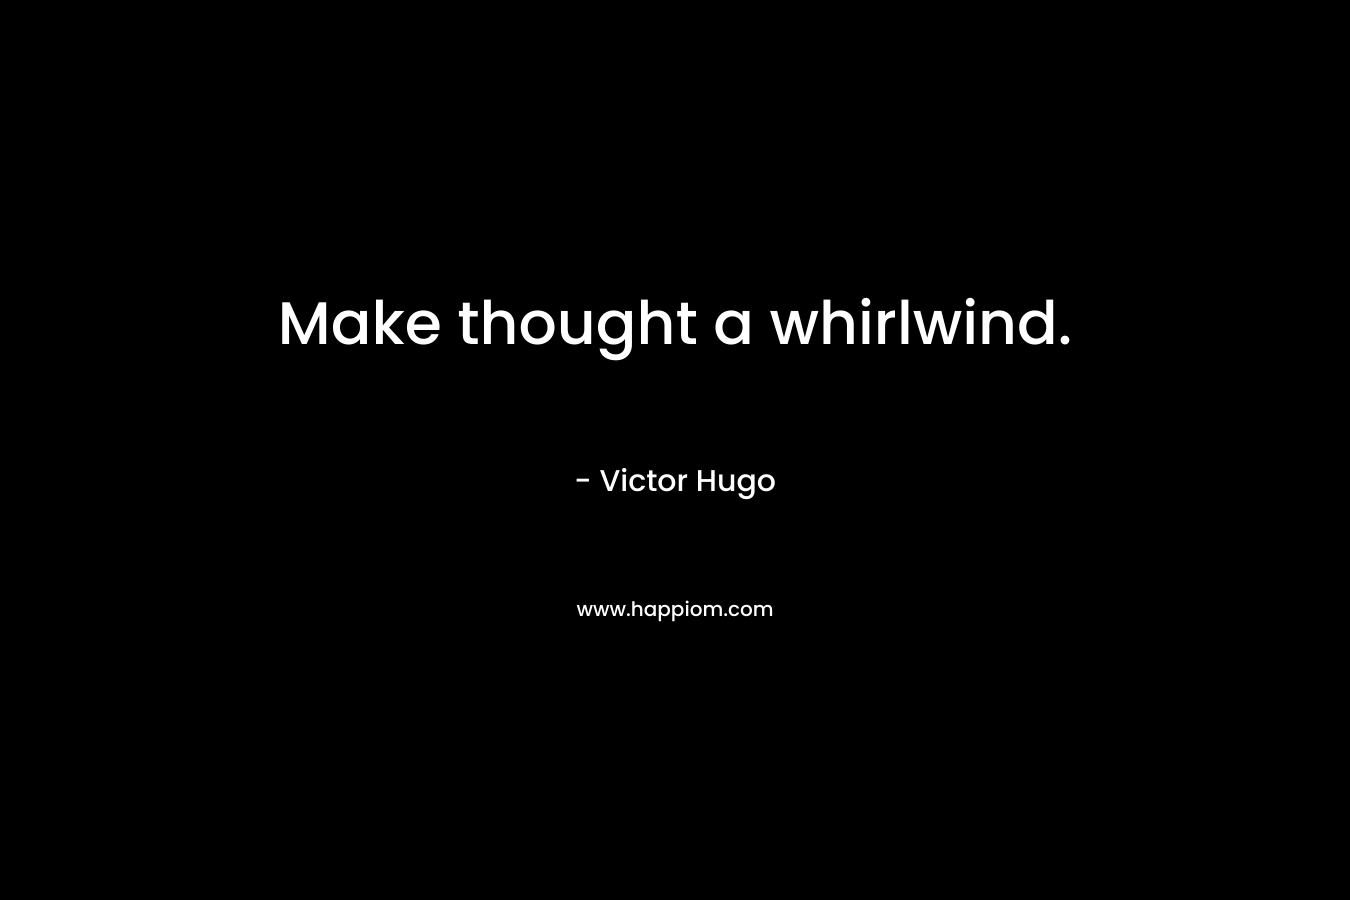 Make thought a whirlwind.